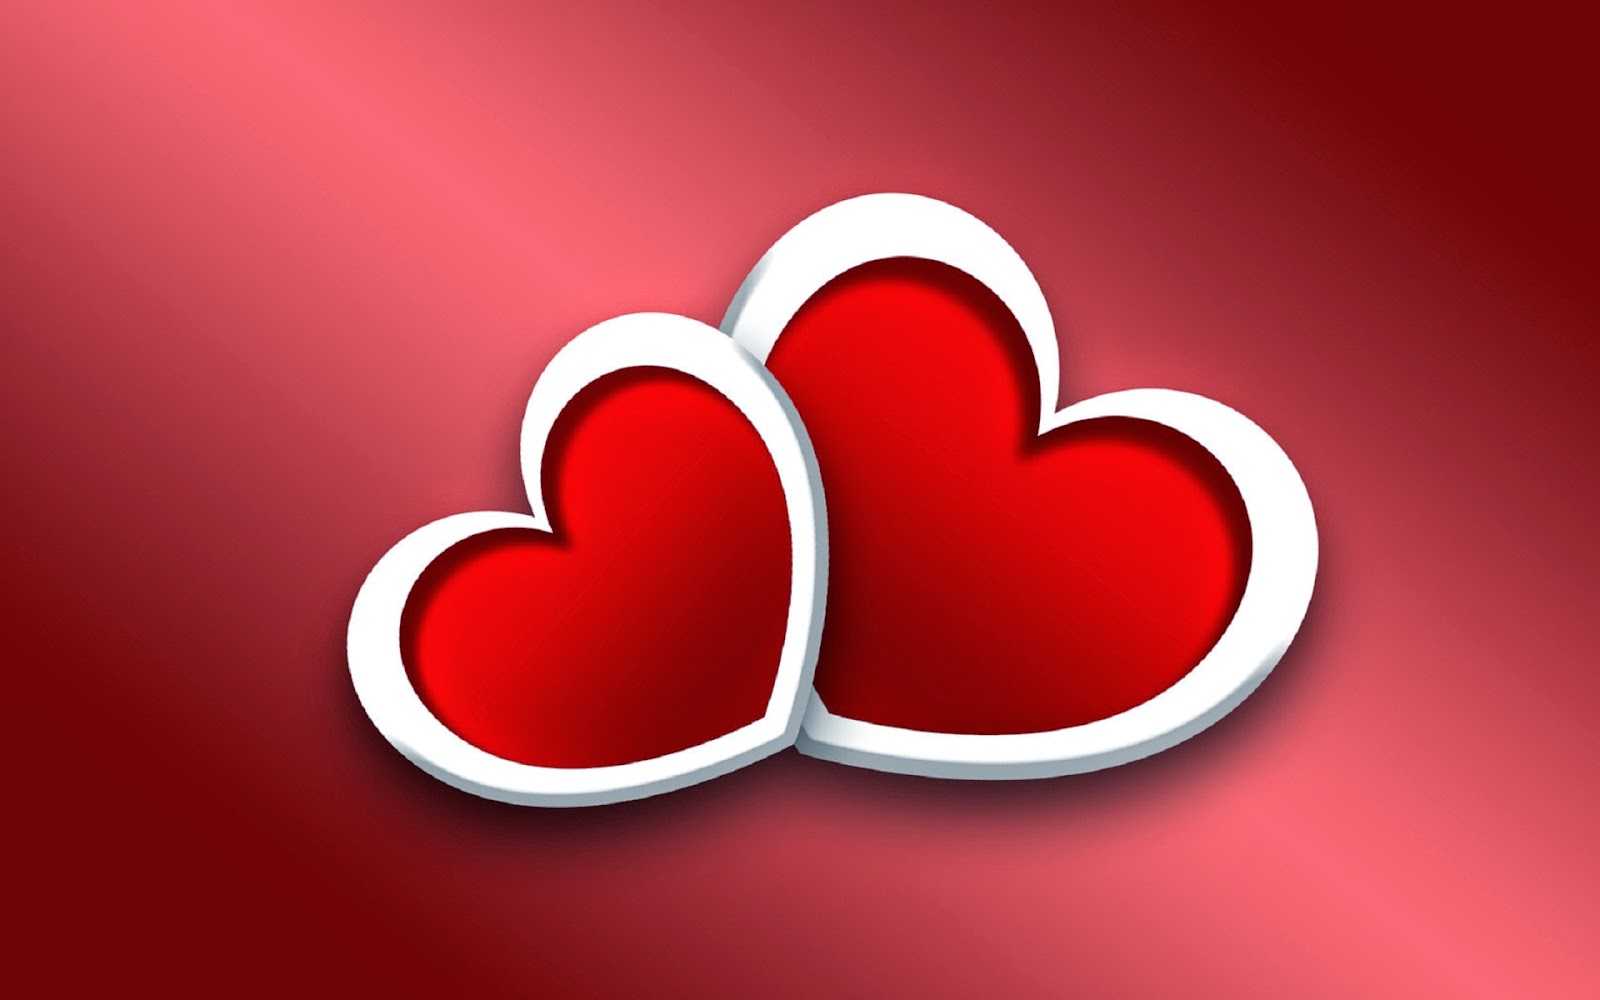 Love Heart Wallpaper Free Download For Mobile - Good Morning Love Images Hd , HD Wallpaper & Backgrounds